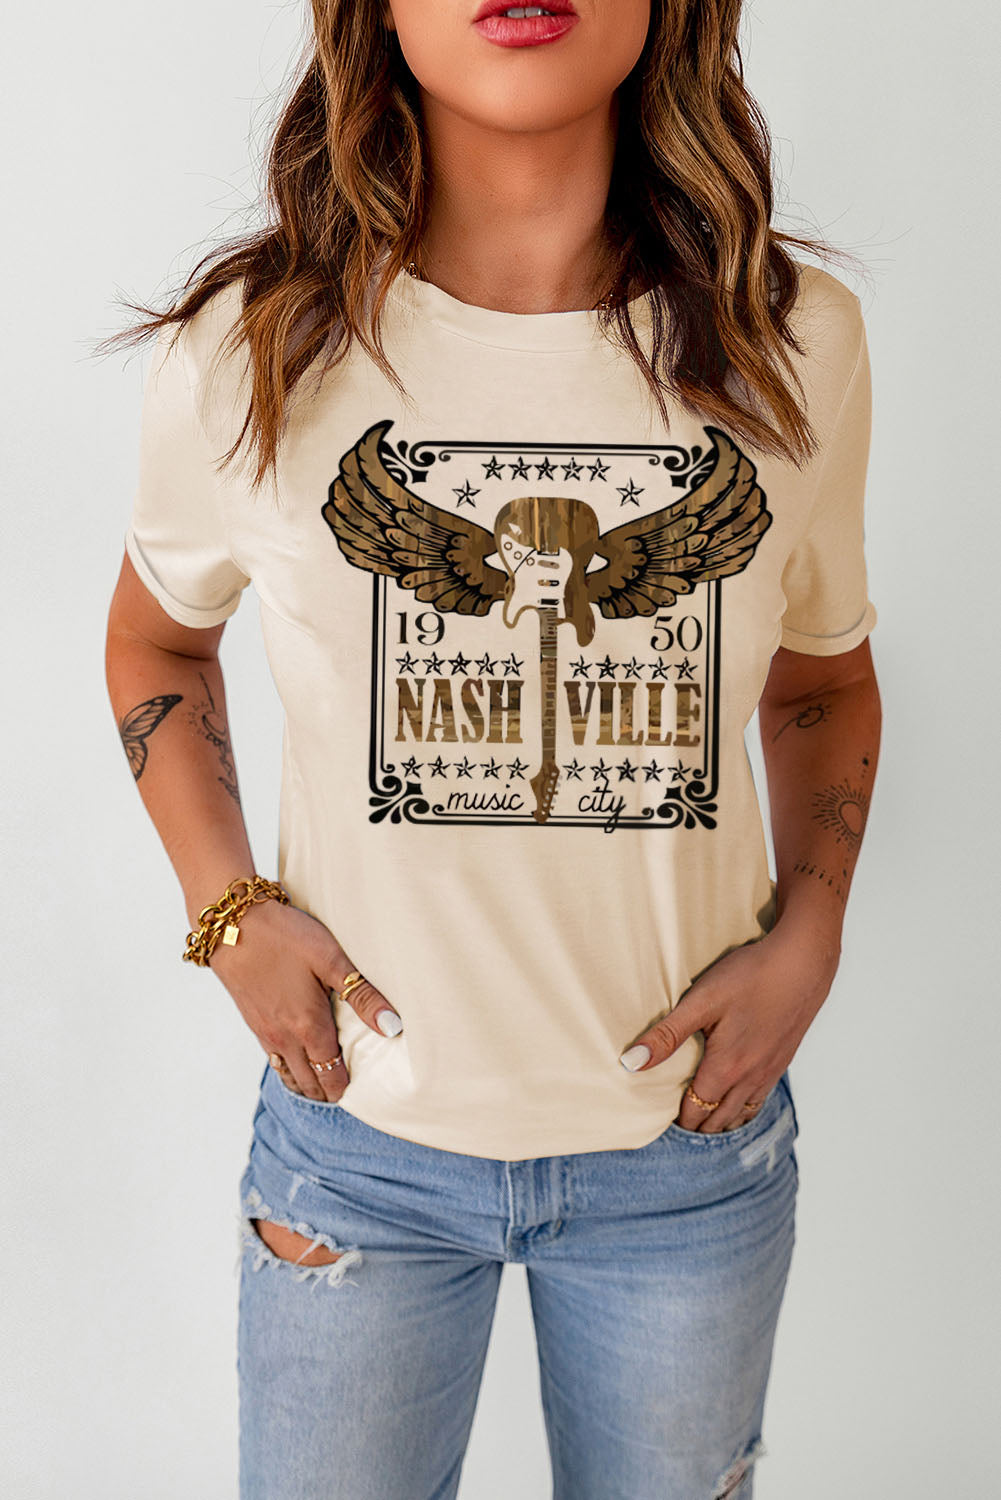 Transport Yourself to the Enchanting 1950 Nashville Music Scene - Indulge in Comfort and Style with Our Luxurious Graphic Tee Shirt - Stand Out Effortlessly! - Guy Christopher 